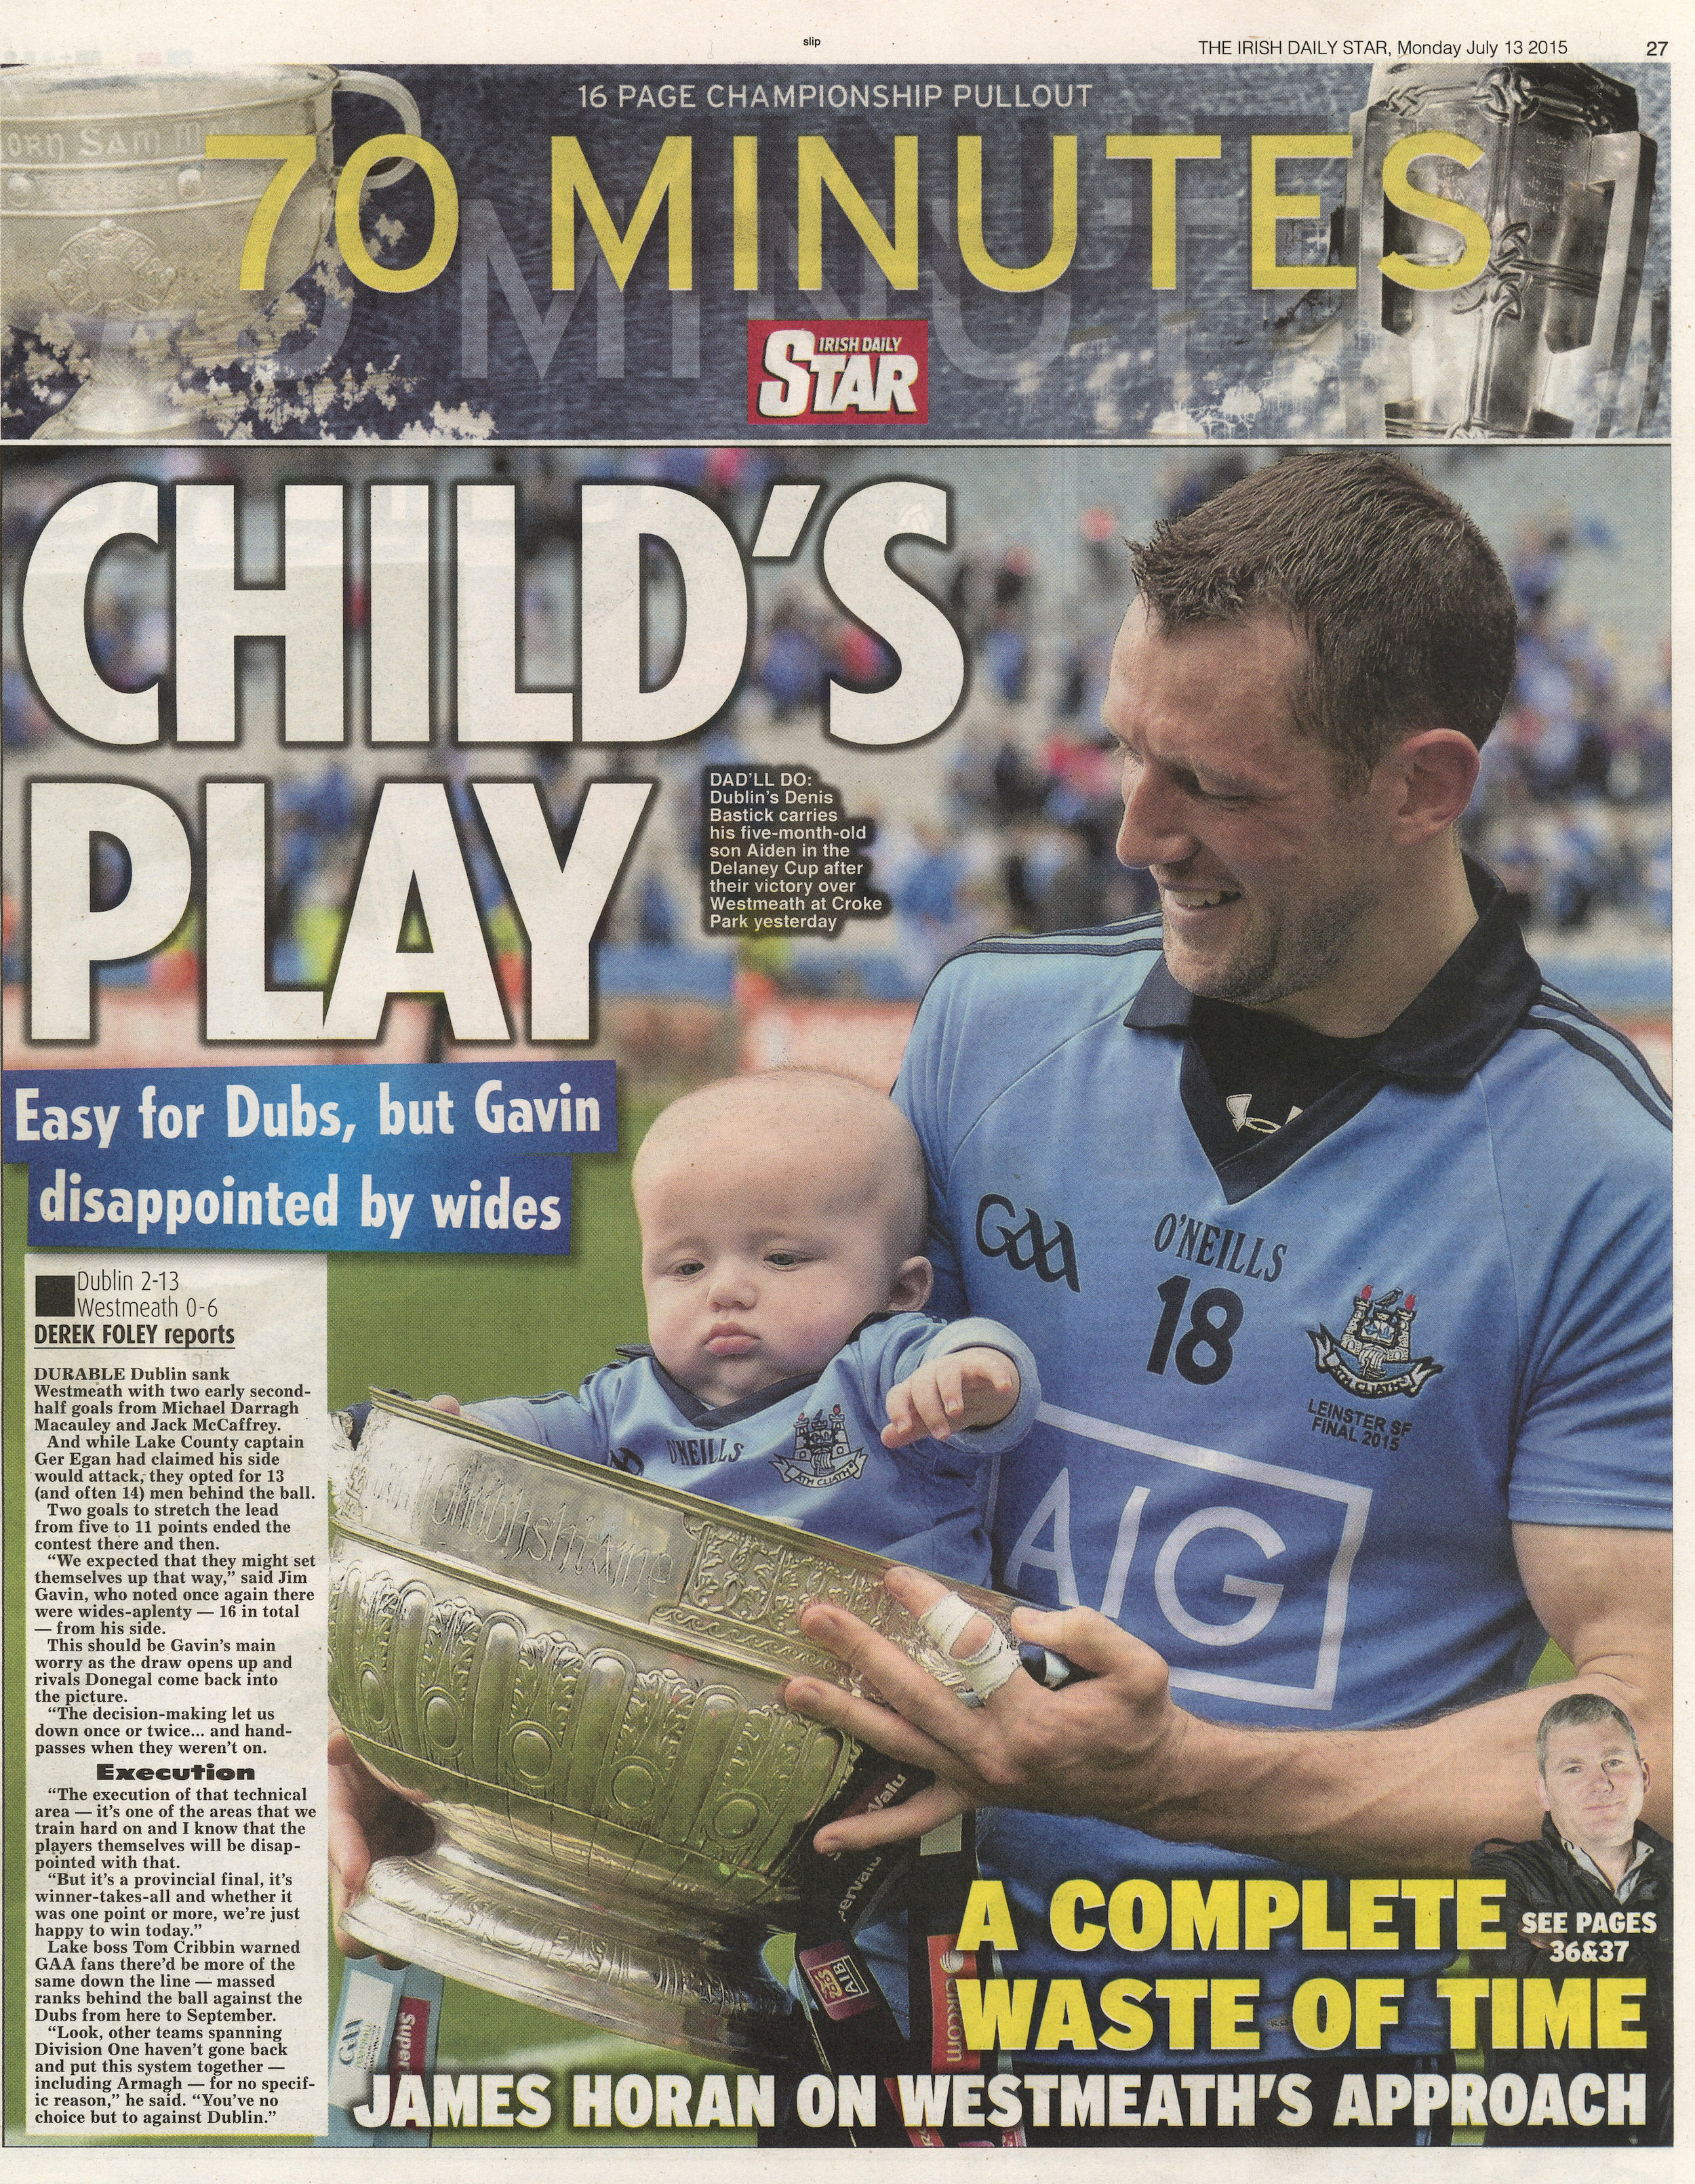  Denis Bastick of Dublin celebrates with his newborn son Aiden and the Delaney Cup after League Championship over Westmeath in Croke Park July 13 2015 /  Irish Daily Star  